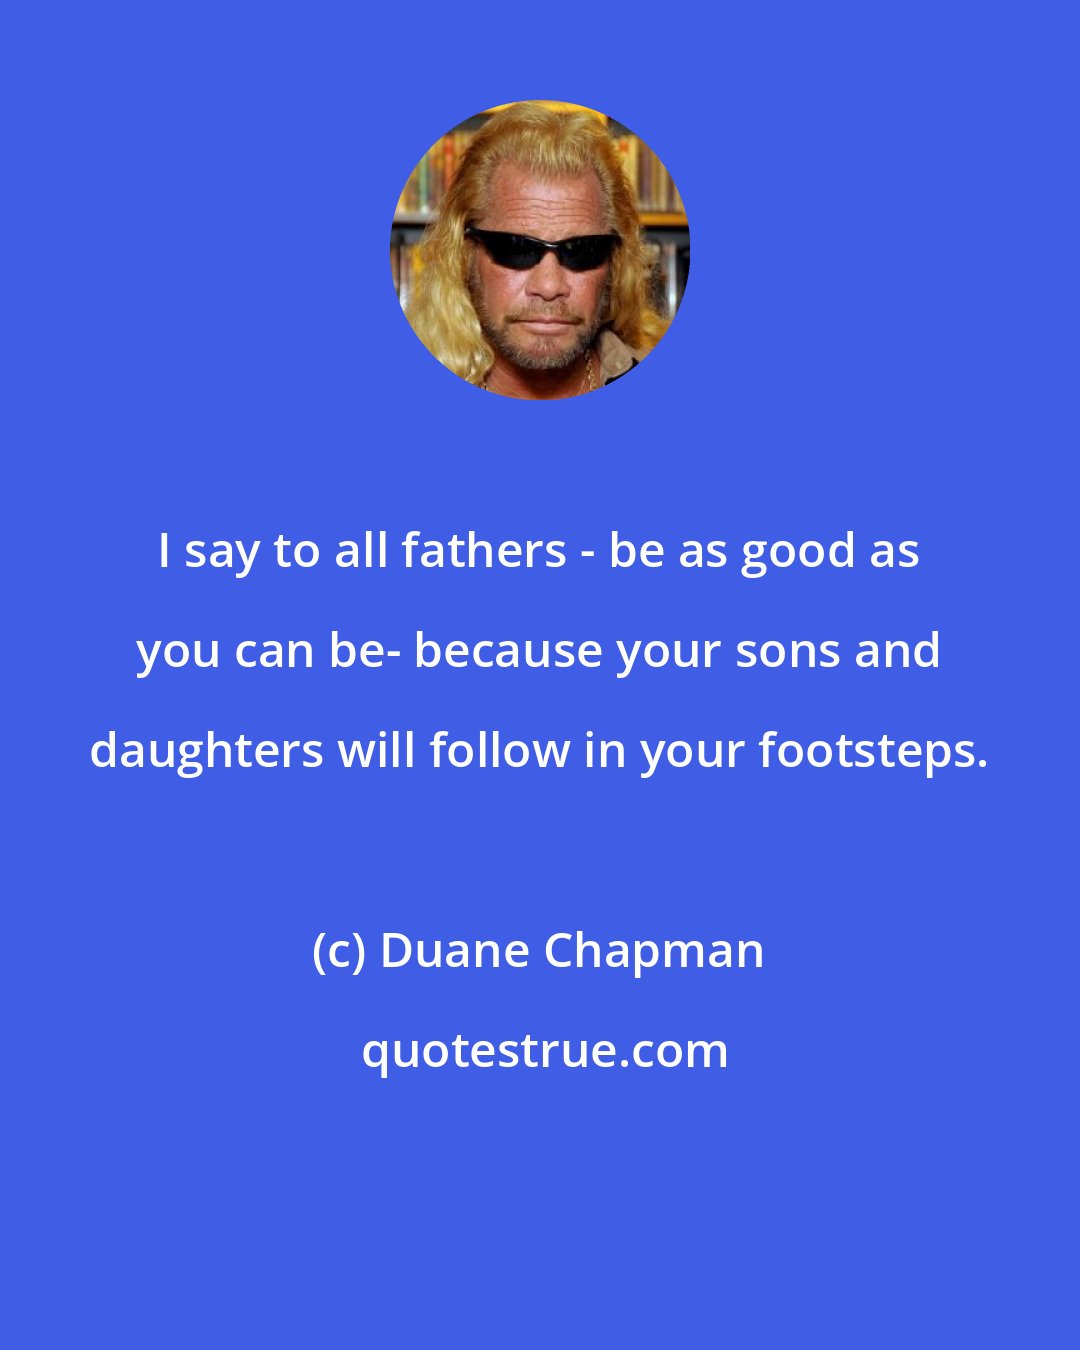 Duane Chapman: I say to all fathers - be as good as you can be- because your sons and daughters will follow in your footsteps.